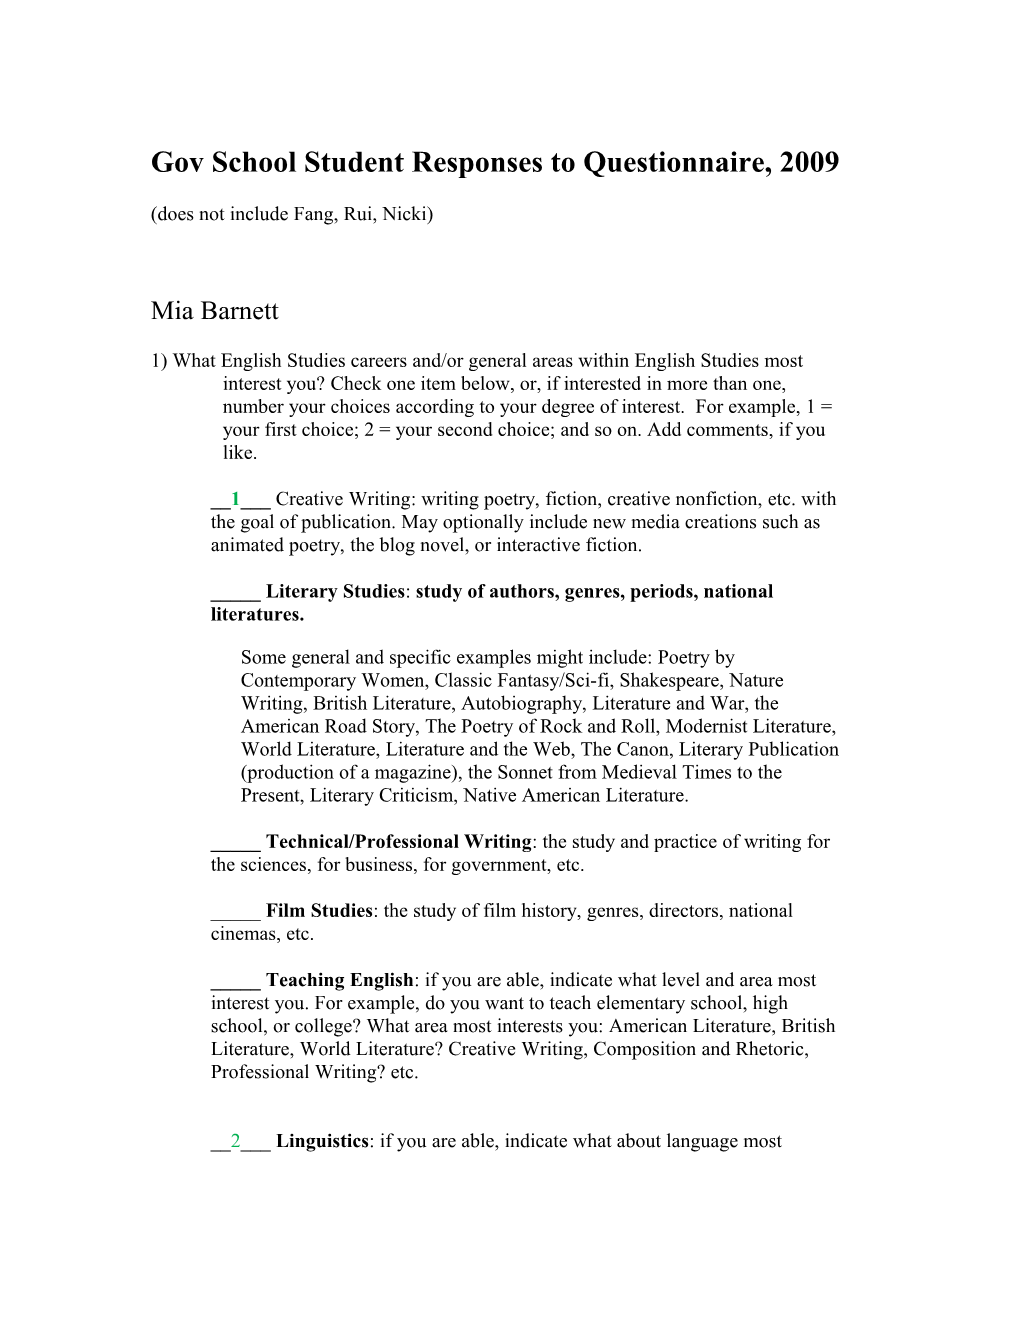 Govschool Student Responses to Questionnaire, 2009